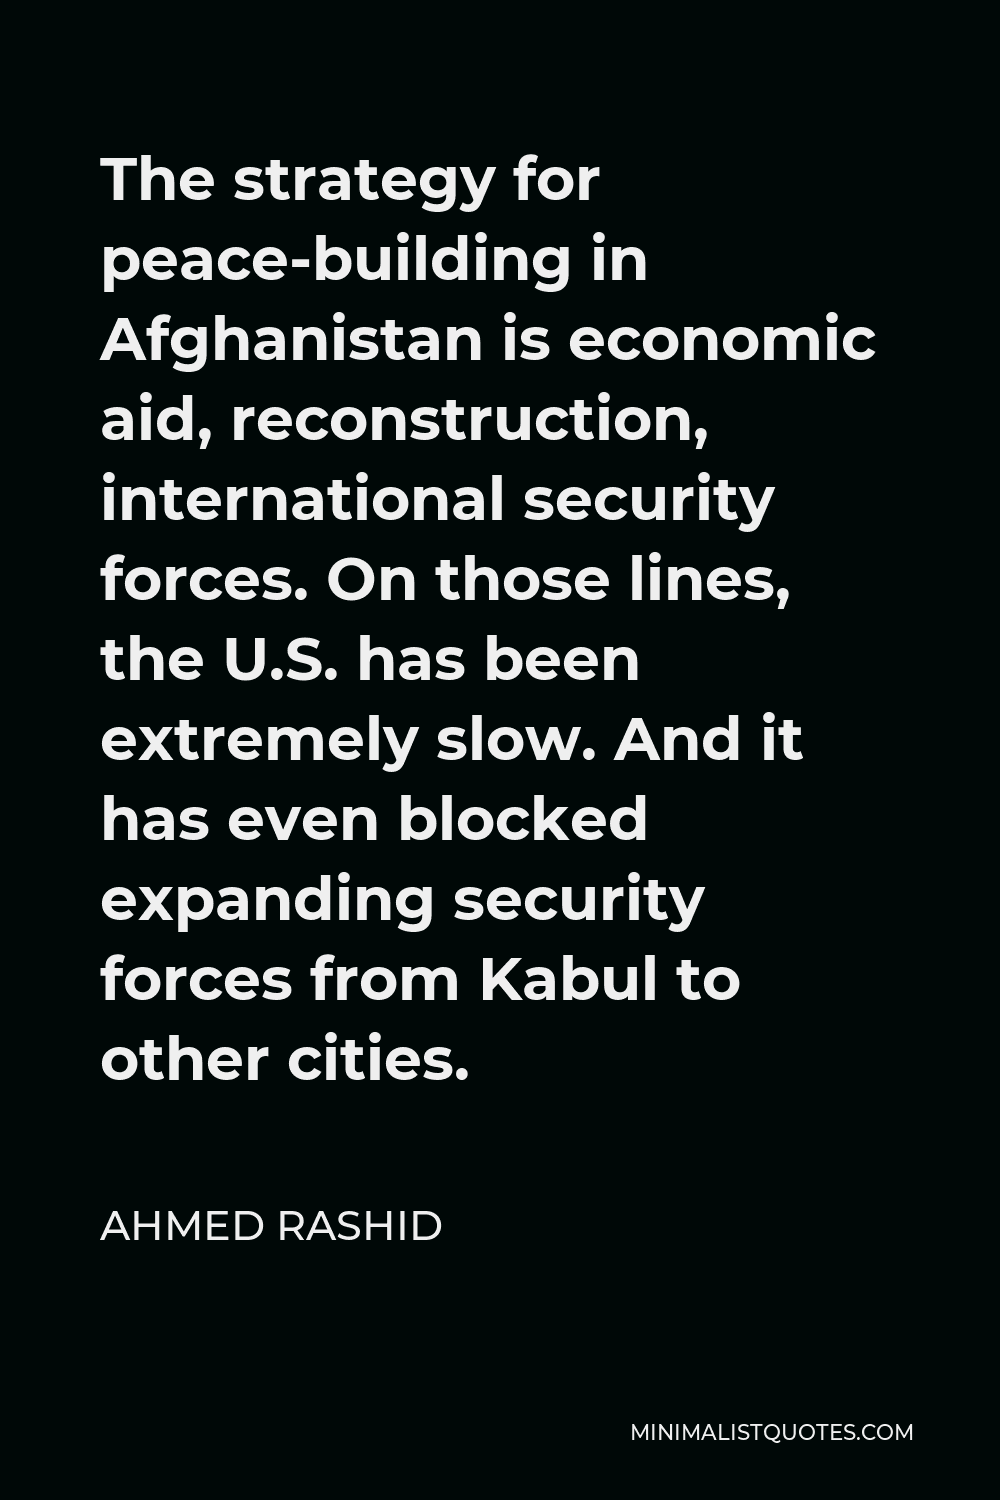 Ahmed Rashid Quote - The strategy for peace-building in Afghanistan is economic aid, reconstruction, international security forces. On those lines, the U.S. has been extremely slow. And it has even blocked expanding security forces from Kabul to other cities.